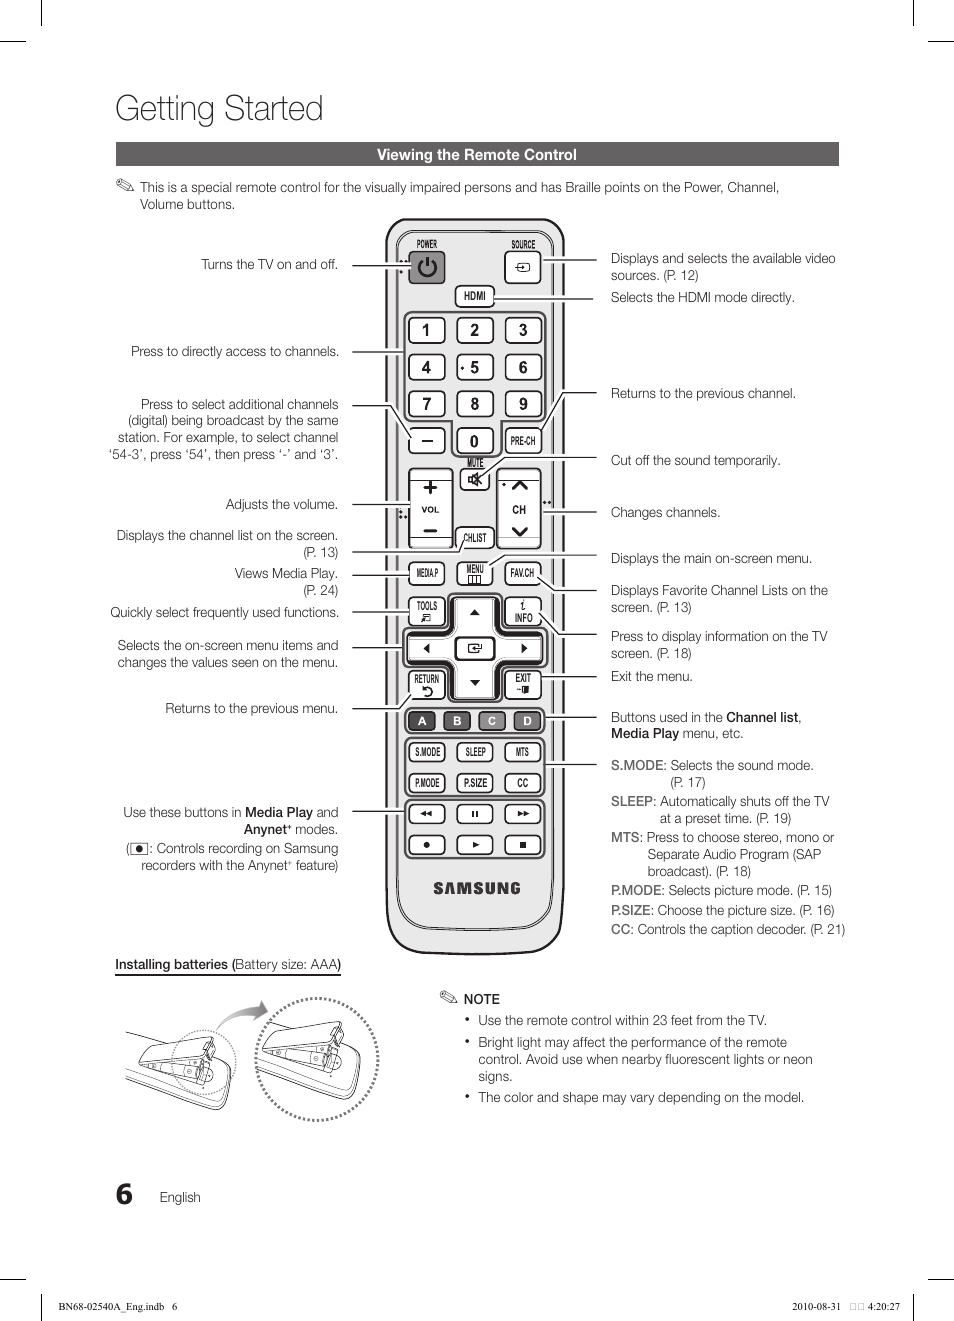 Getting started | Samsung 540 User Manual | Page 6 / 41